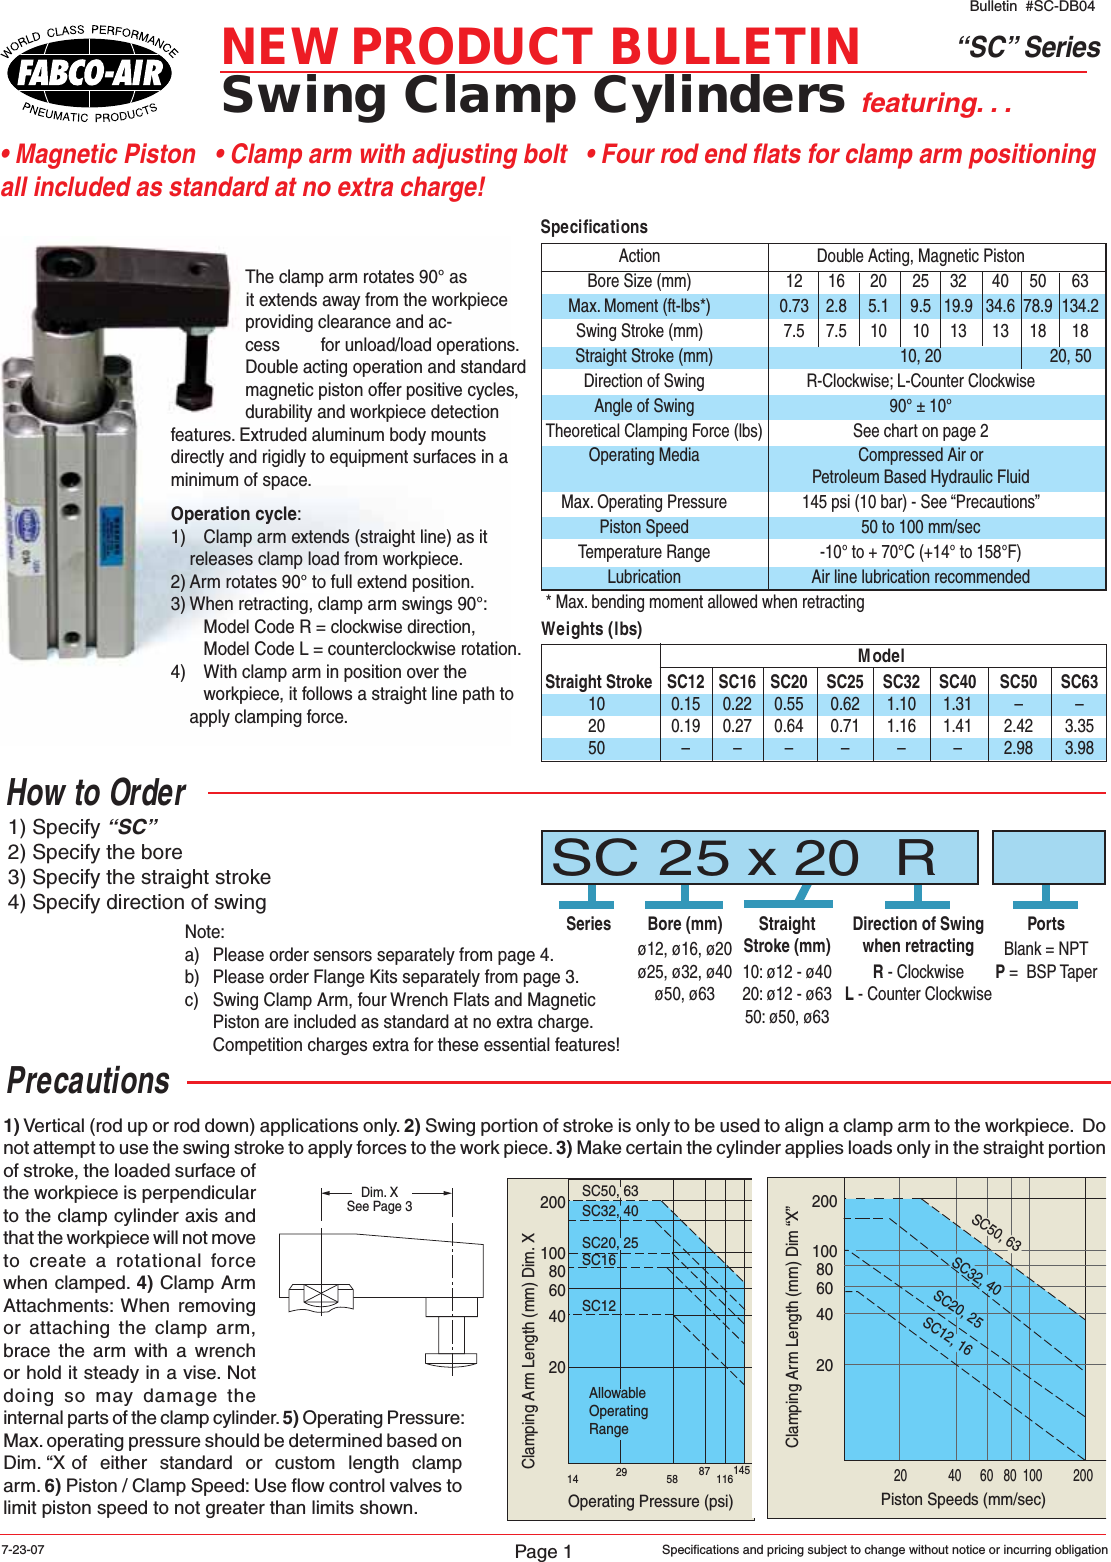 Page 1 of 4 - Flow Fabco-Air Sc Series Clamp Cylinders-1505484123 User Manual